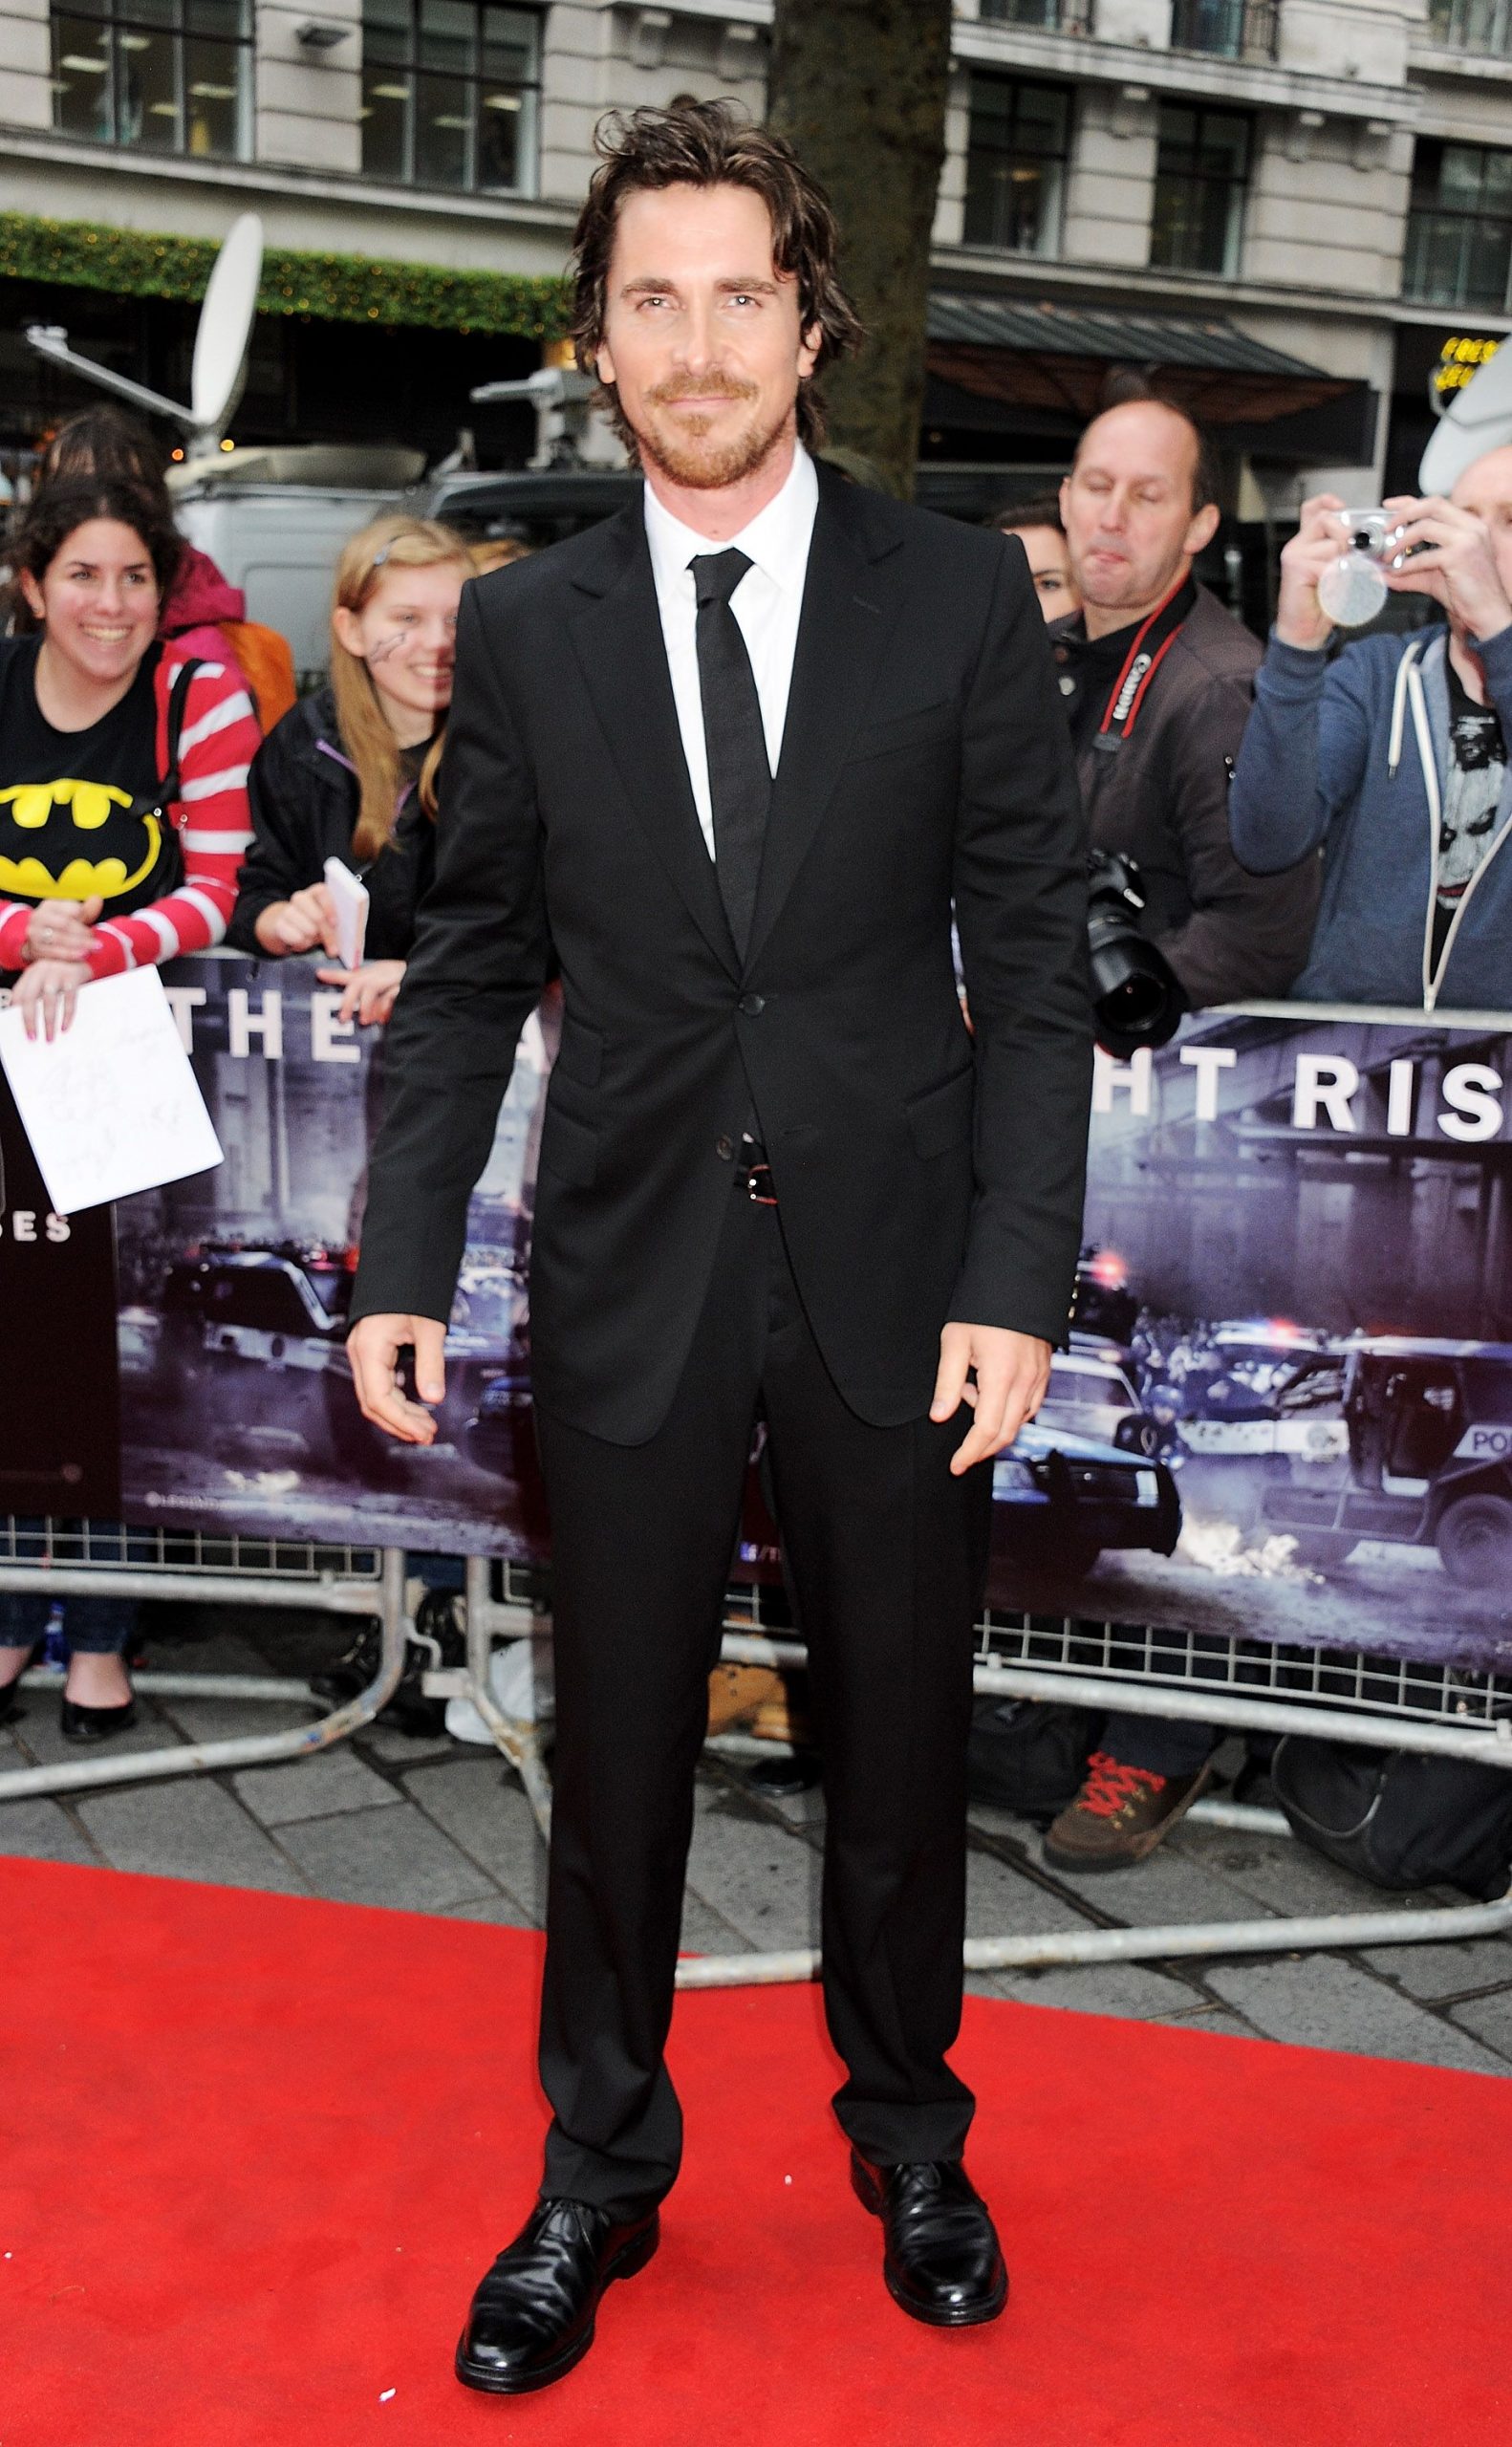 Christian Bale in Gucci at the London premiere of "The Dark Knight Rises" (Photo courtesy | Gucci/Getty Images)